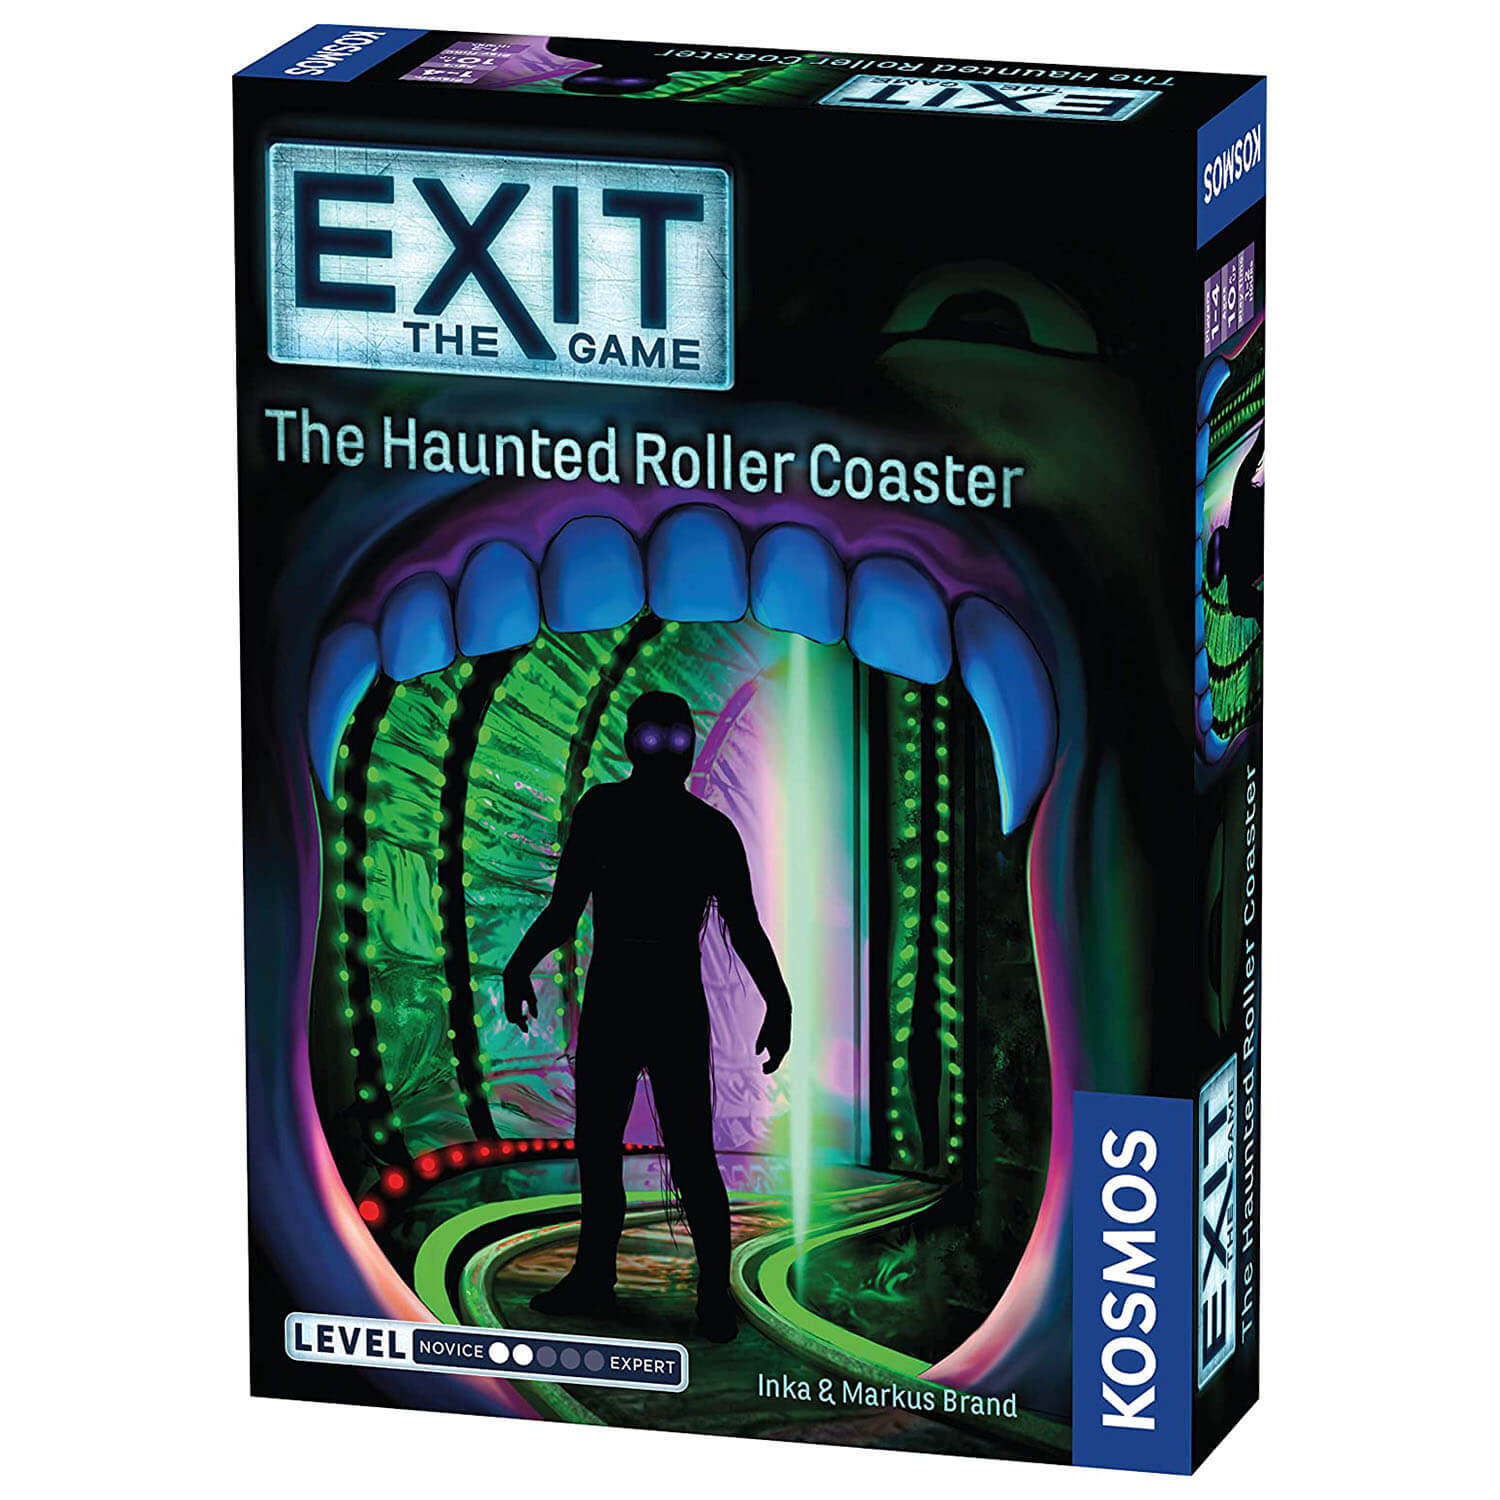 Thames and Kosmos EXIT The Haunted Roller Coaster